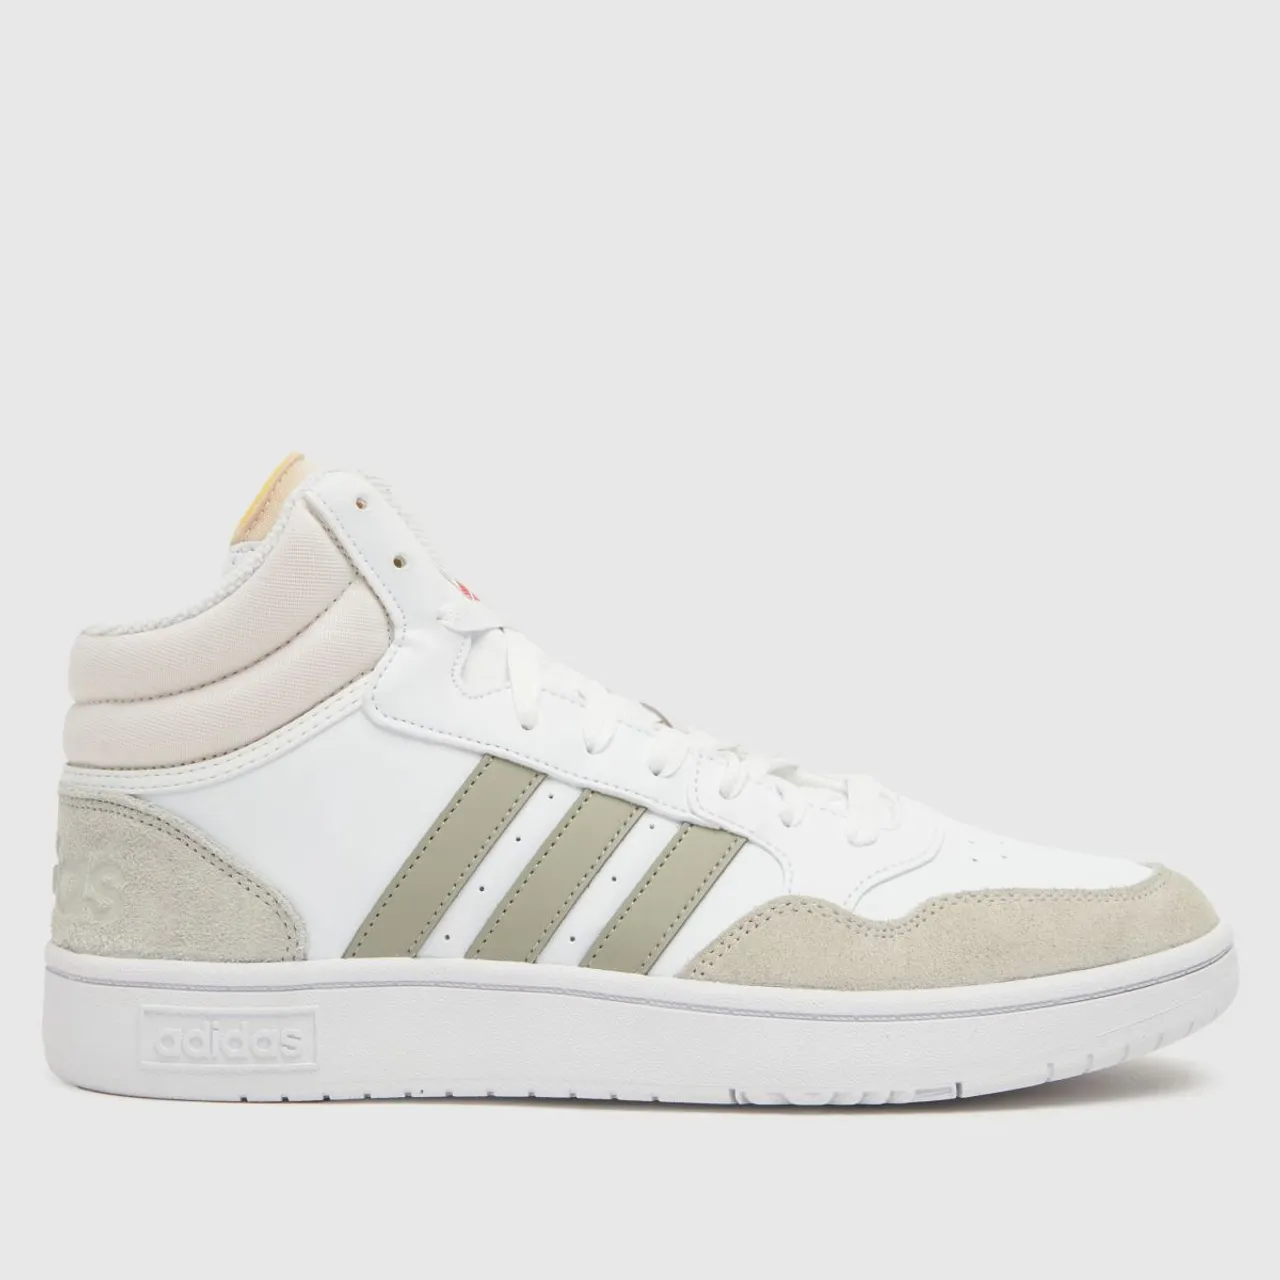 Adidas Hoops 3.0 Mid Trainers In White & Grey